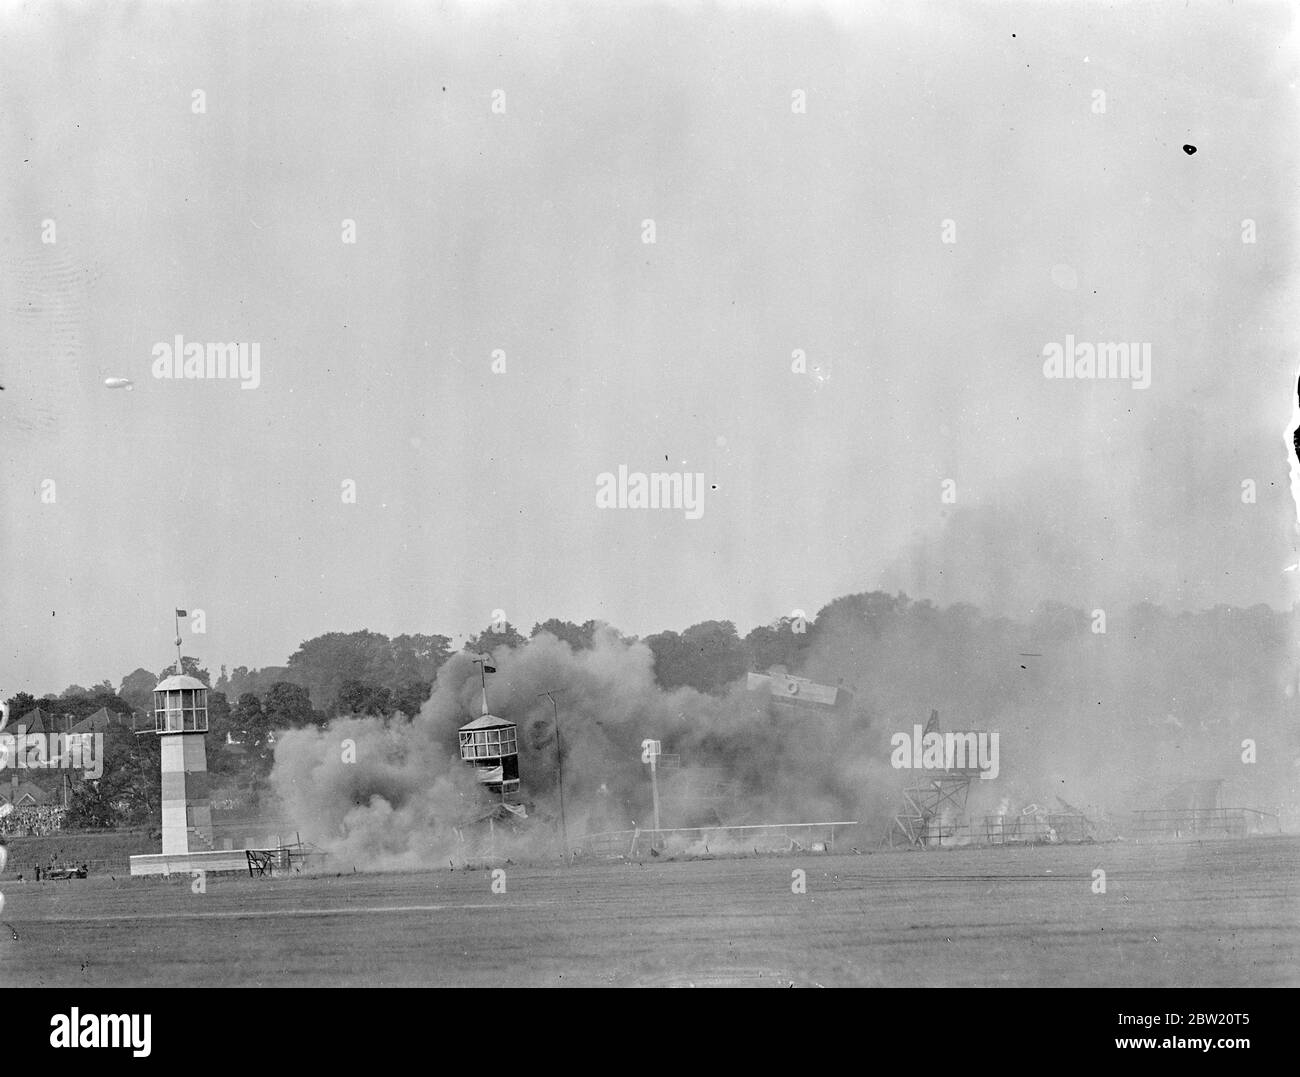 Smoke raising from the port which has been attacked by bombers and torpedo bombers, mimicking air battle at the annual Royal Air Force Pageant at Hendon Aerodrome. 24 June 1937 Stock Photo